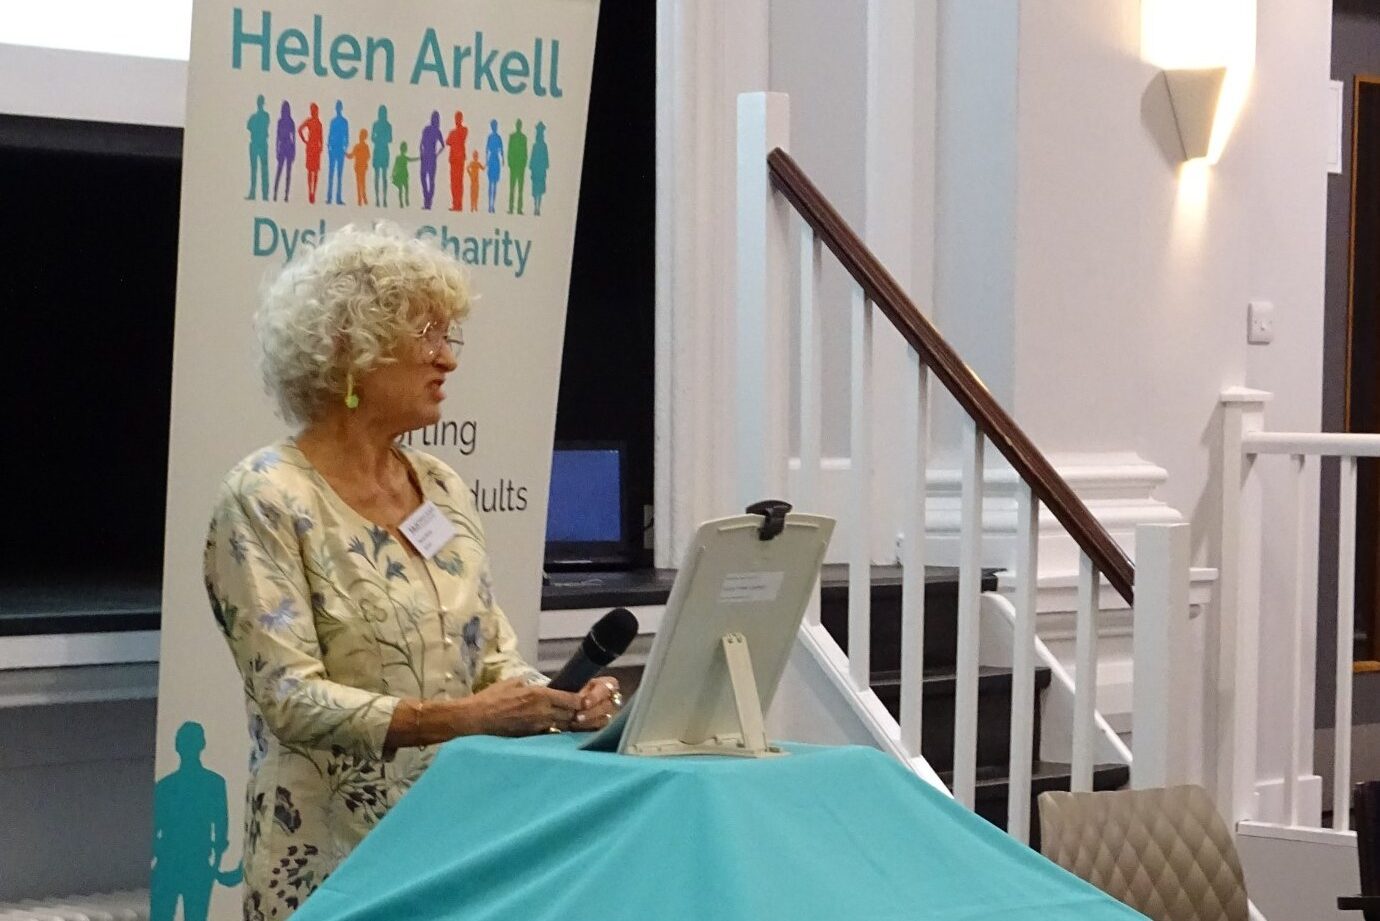 Rosie Wood speaking at the 2022 Helen Arkell Dyslexia Level 5 graduation ceremony